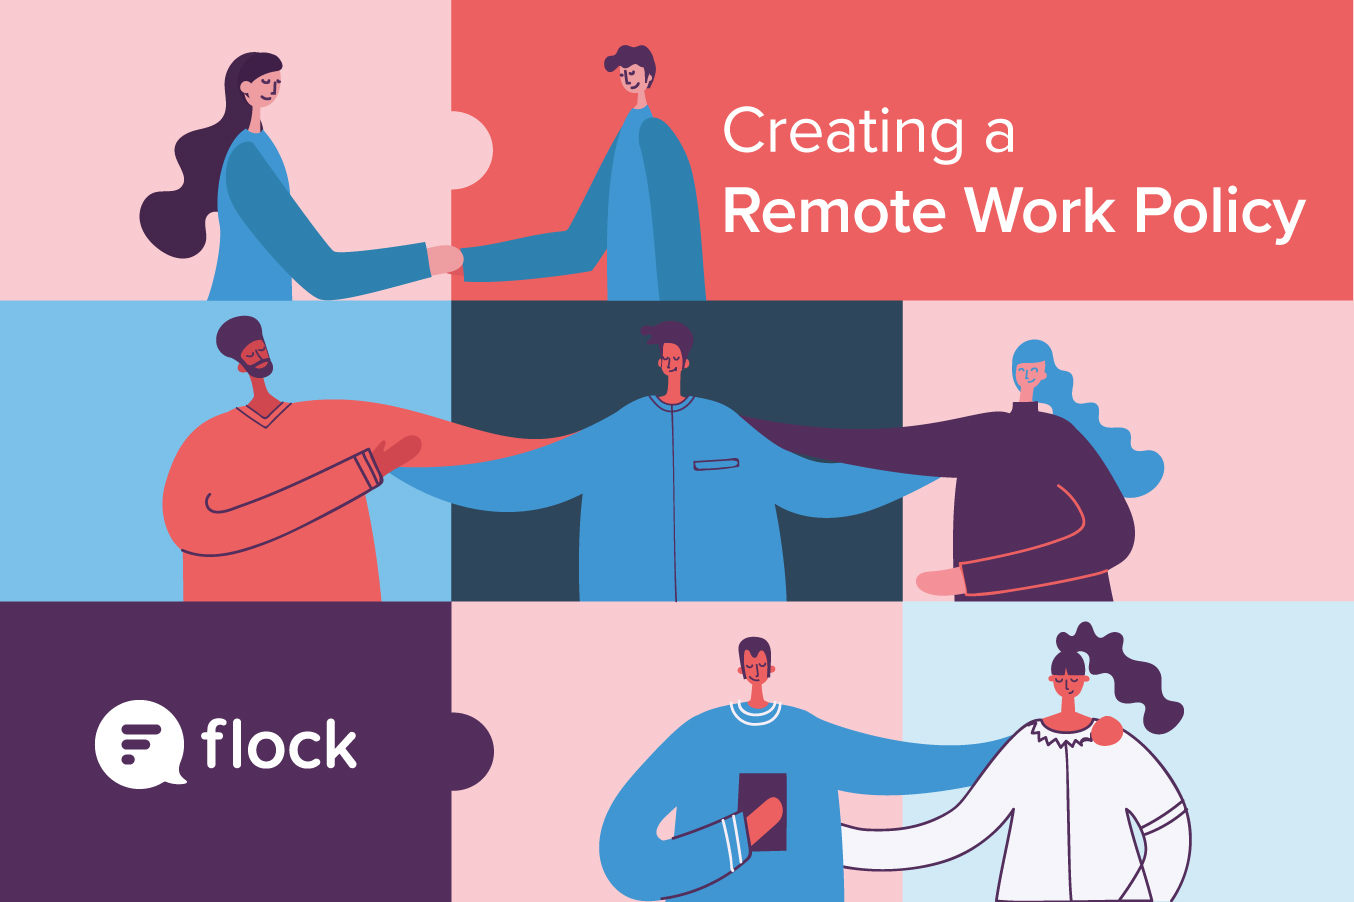 Creating a Remote Work Policy